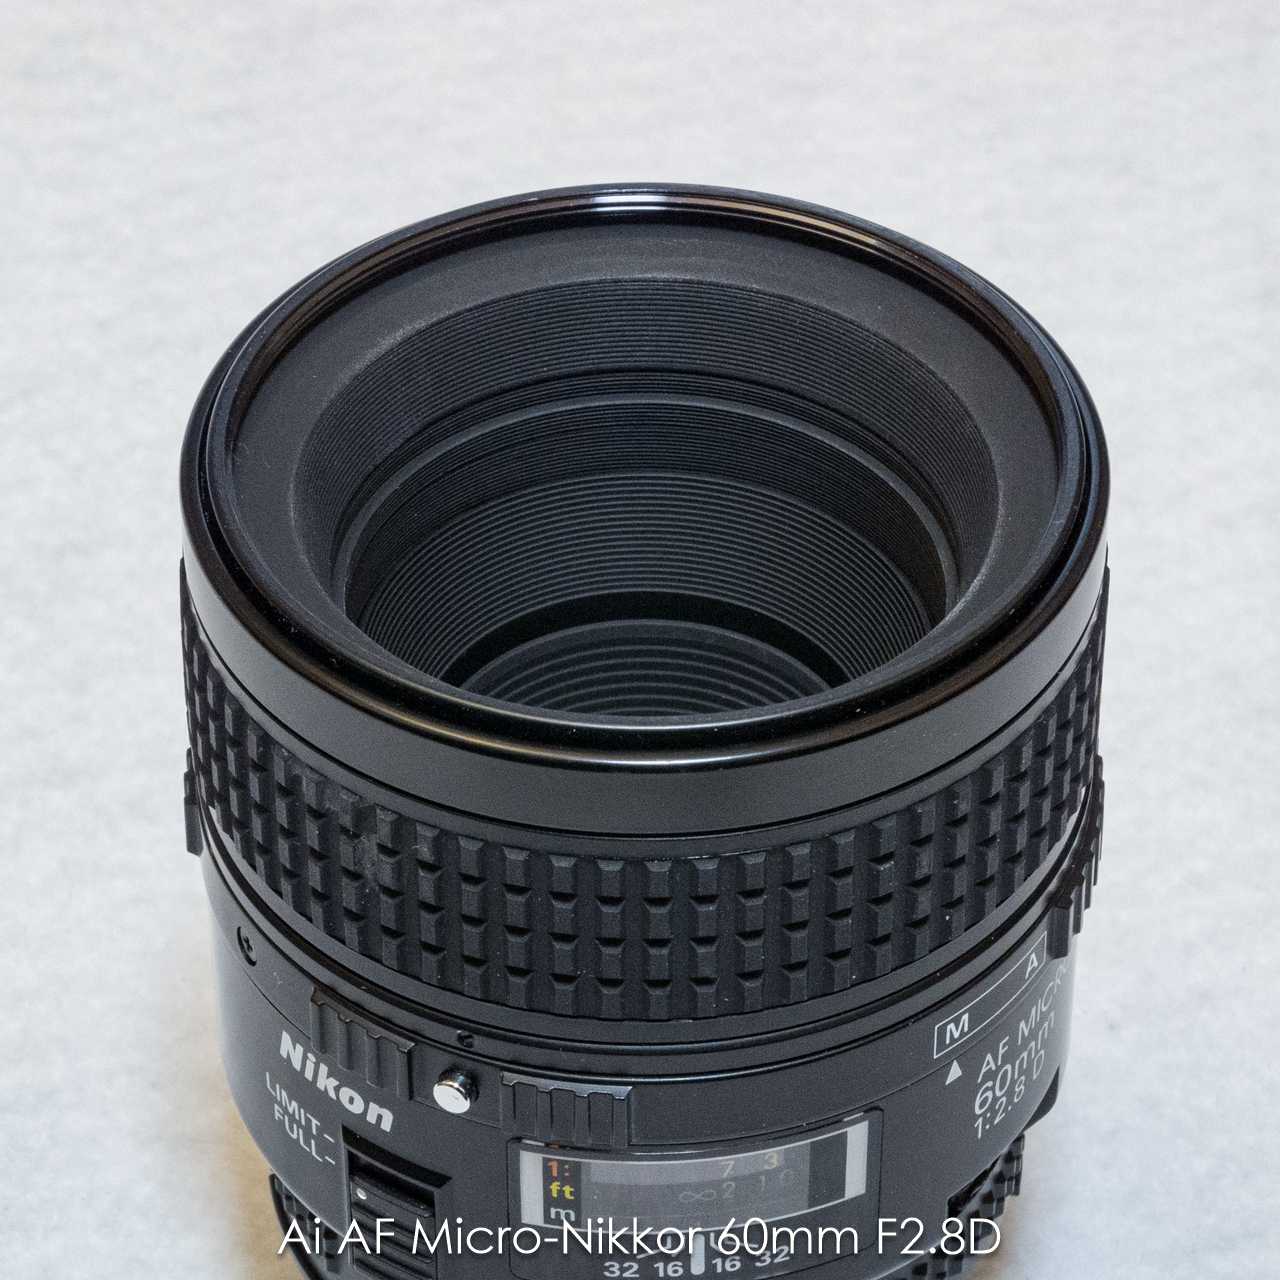 Ai AF Micro-Nikkor 60mm F2.8D」の魅力Nikon 60mmマイクロは2本 